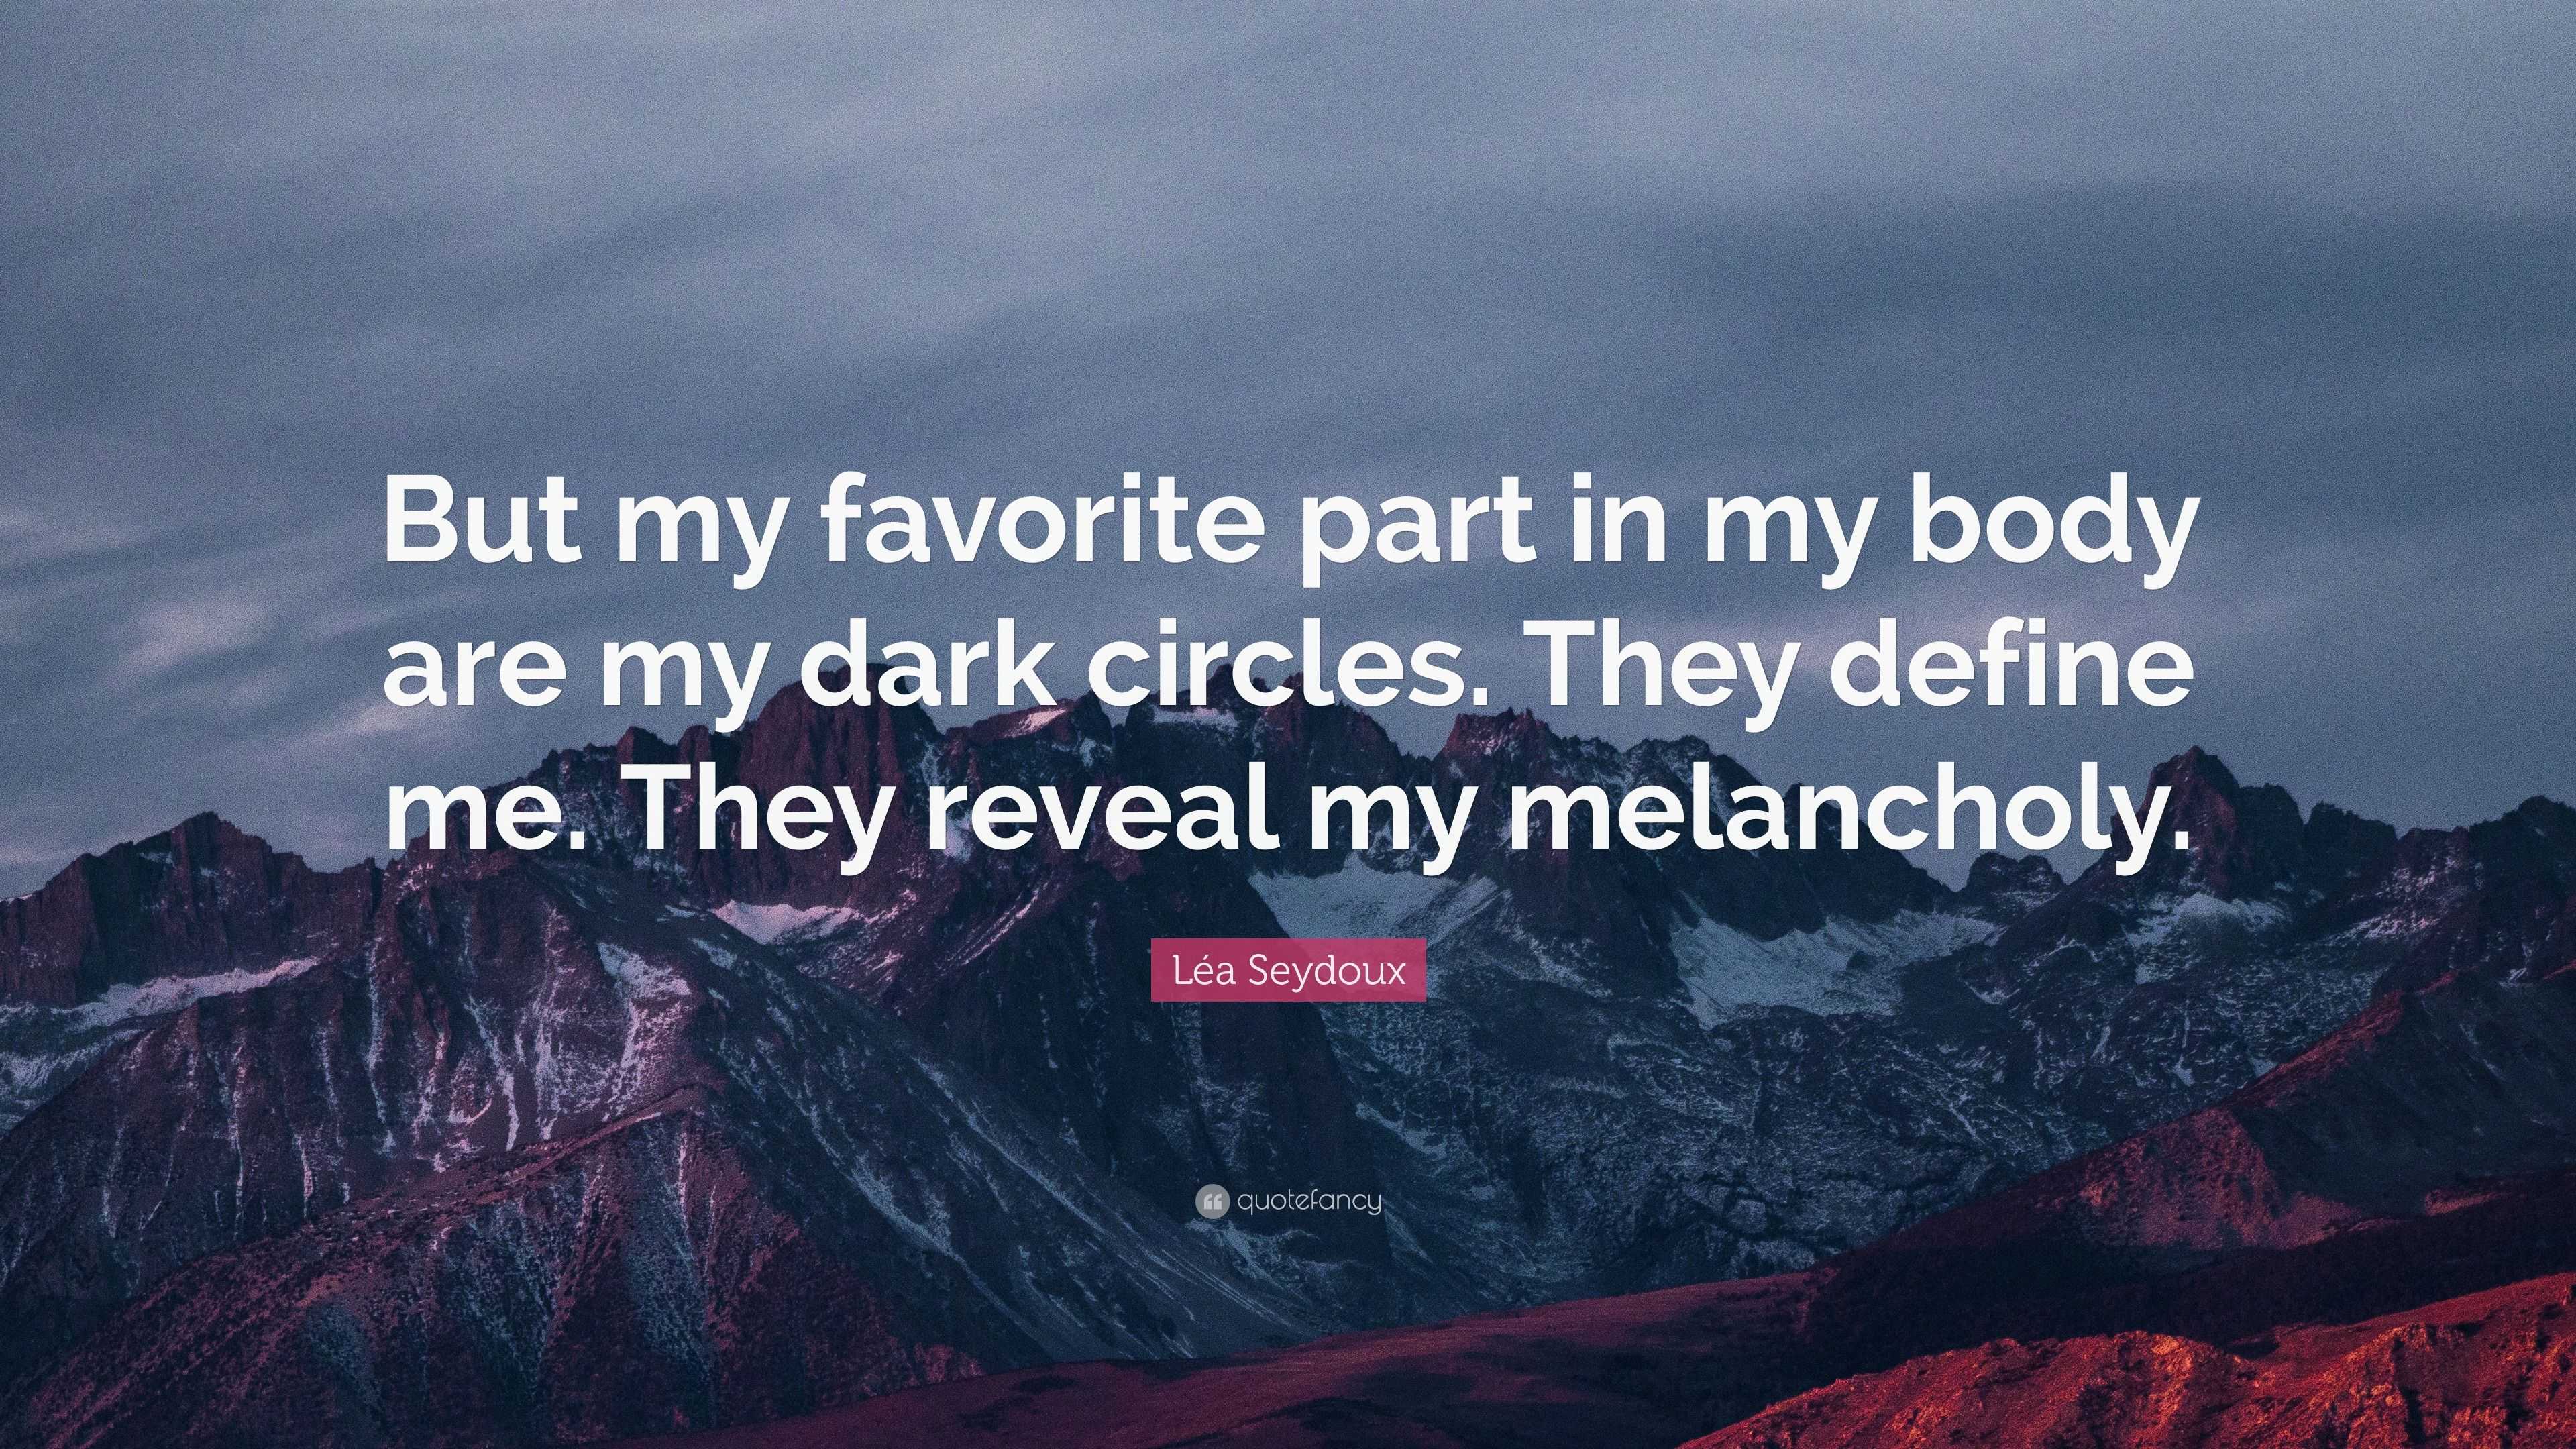 Léa Seydoux Quote: “But my favorite part in my body are my dark circles ...